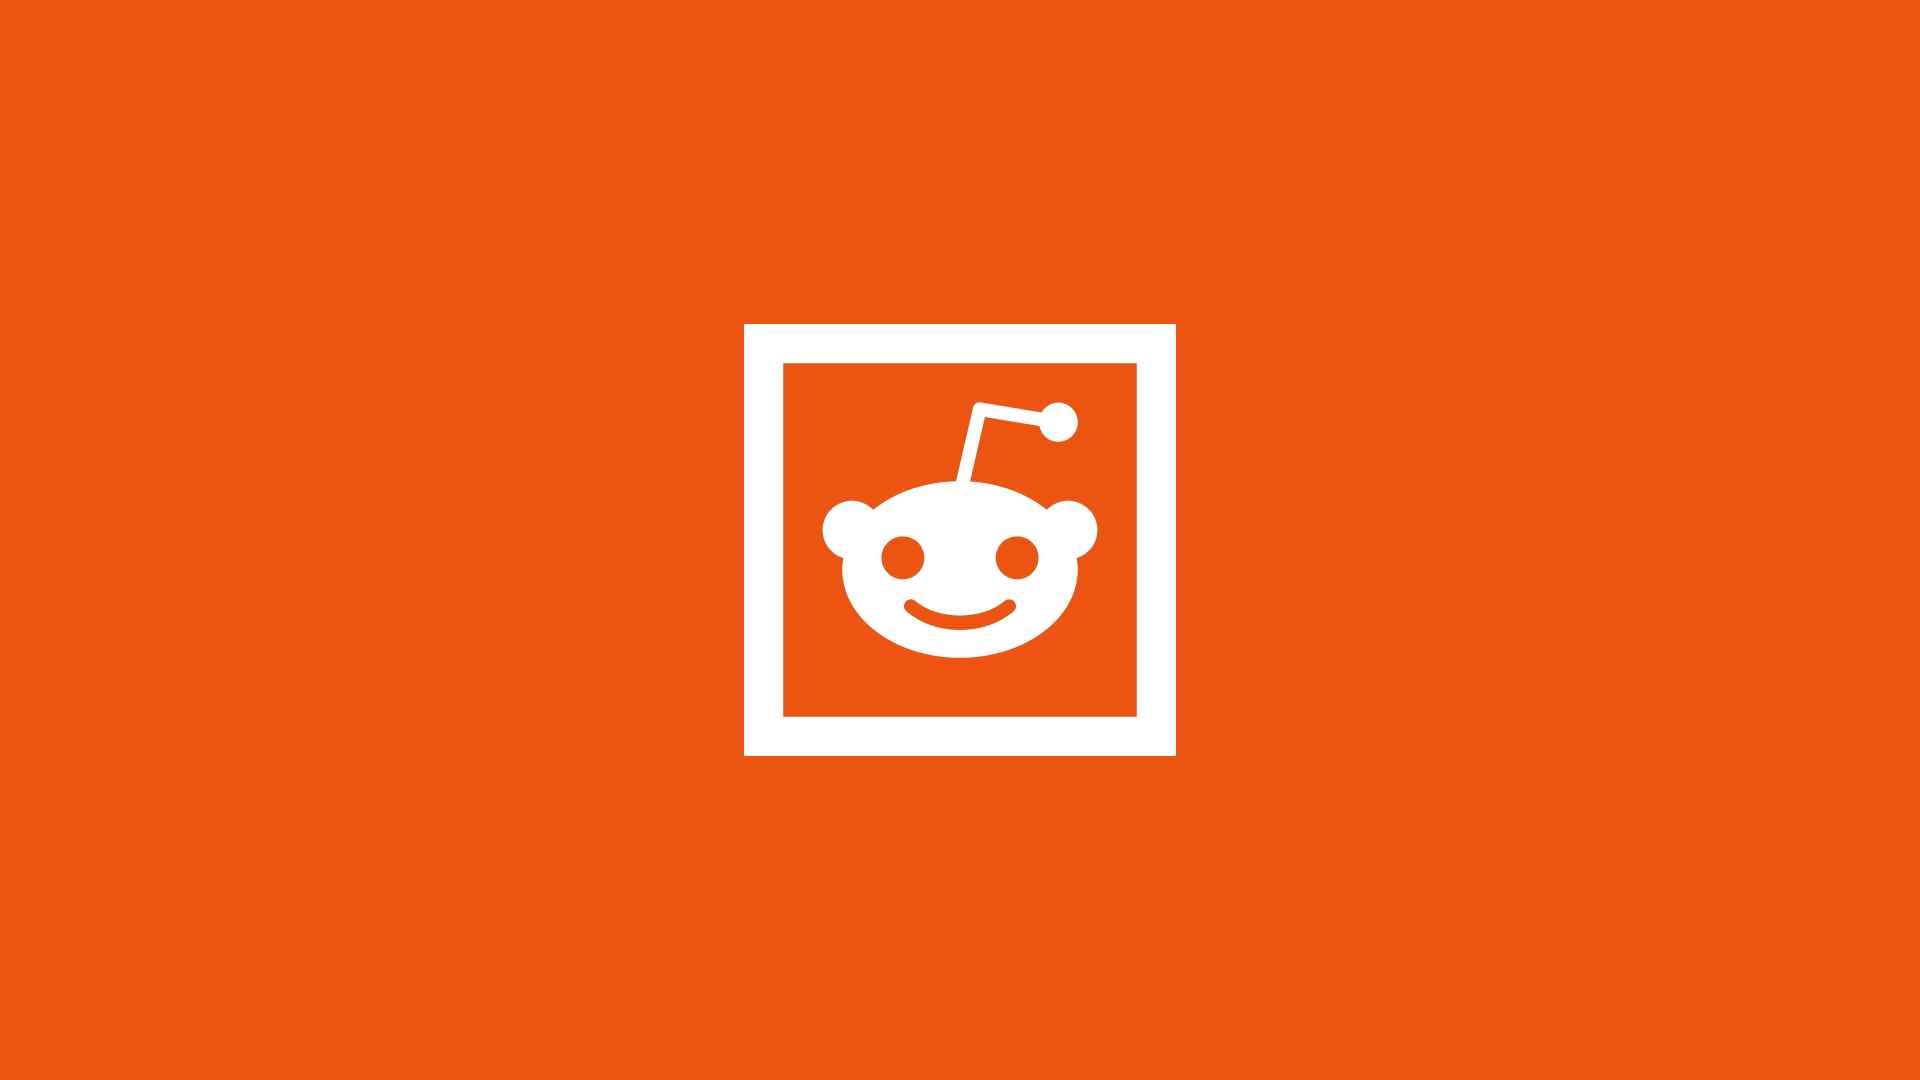 Can users customize their Reddit profile or avatar with personal images or designs?